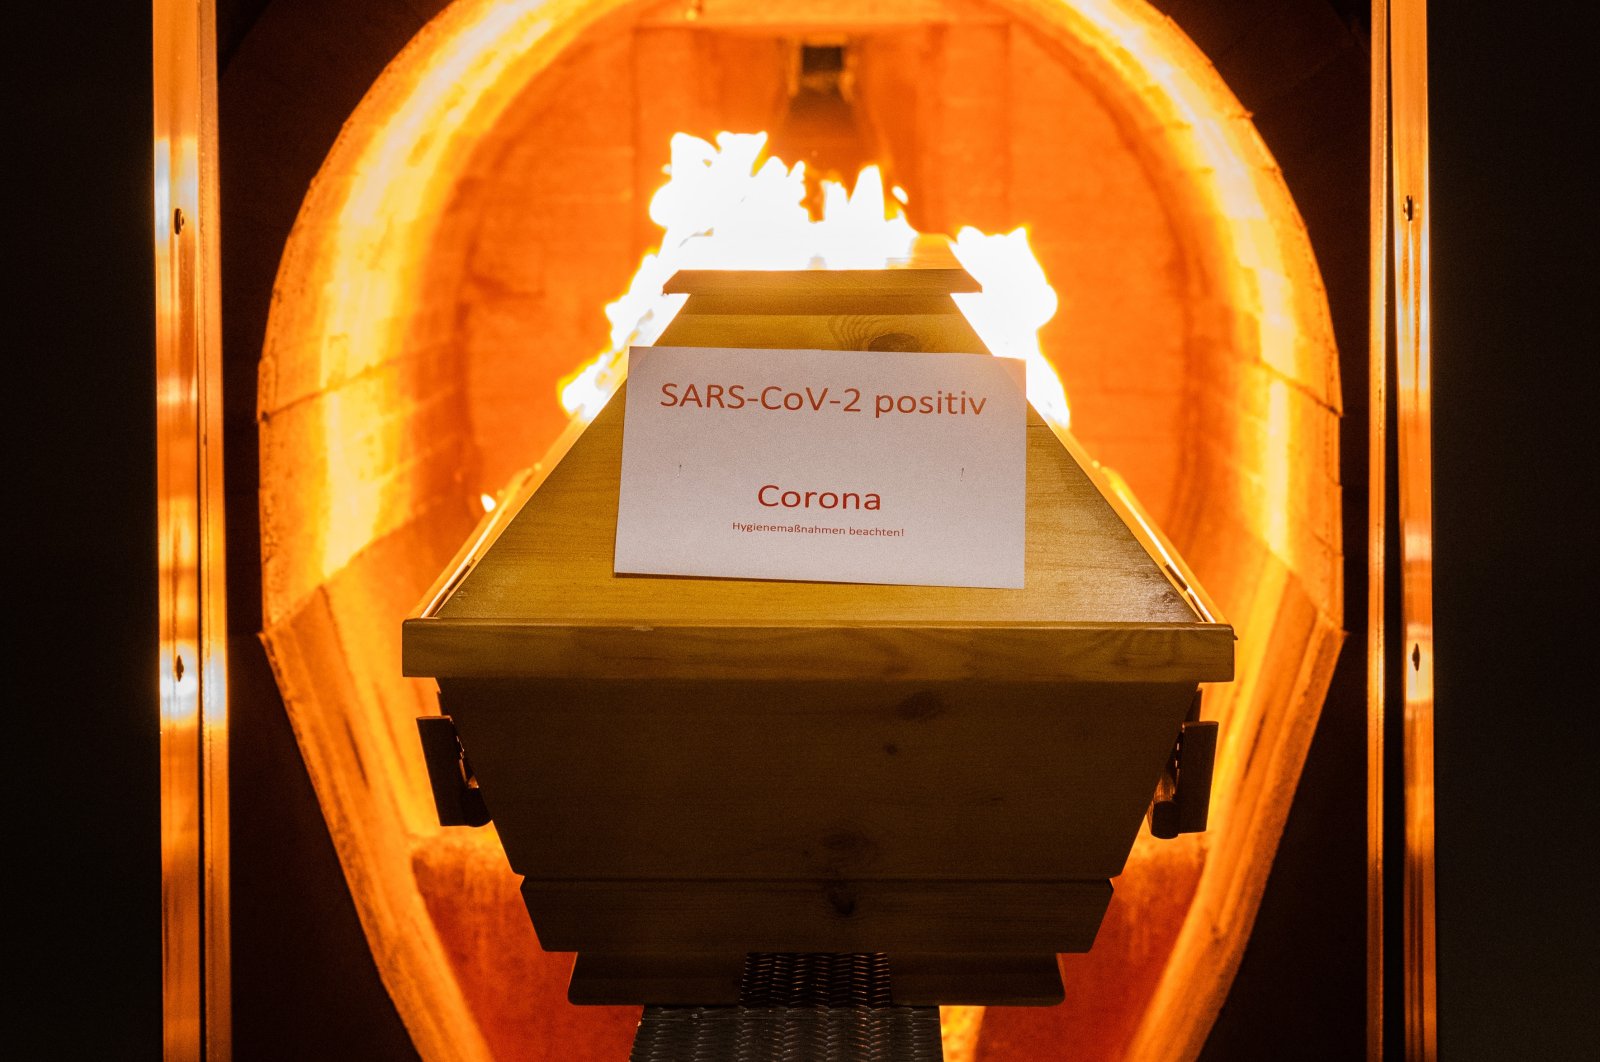 A deceased person in a coffin labelled “SARS-CoV-2 positive – Corona” is cremated in an oven at the crematorium “Die Feuerbestattungen Hildesheim,” in Giesen, Lower Saxony, Germany, Nov. 25, 2021. (Getty Images)